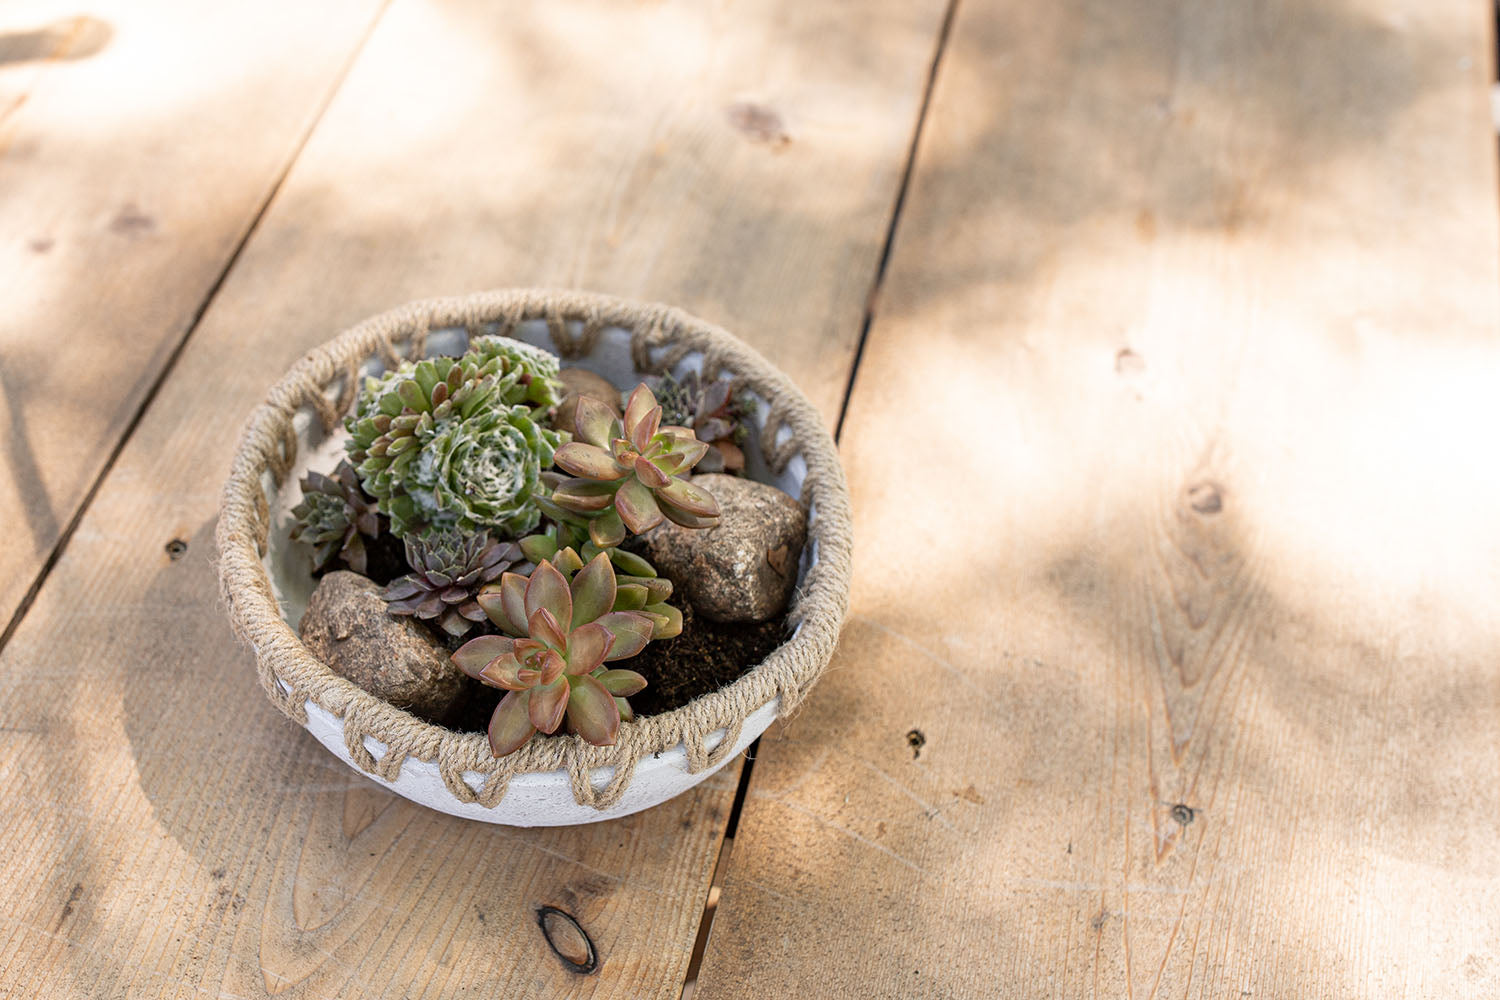 landon planter bowl with succulents on table